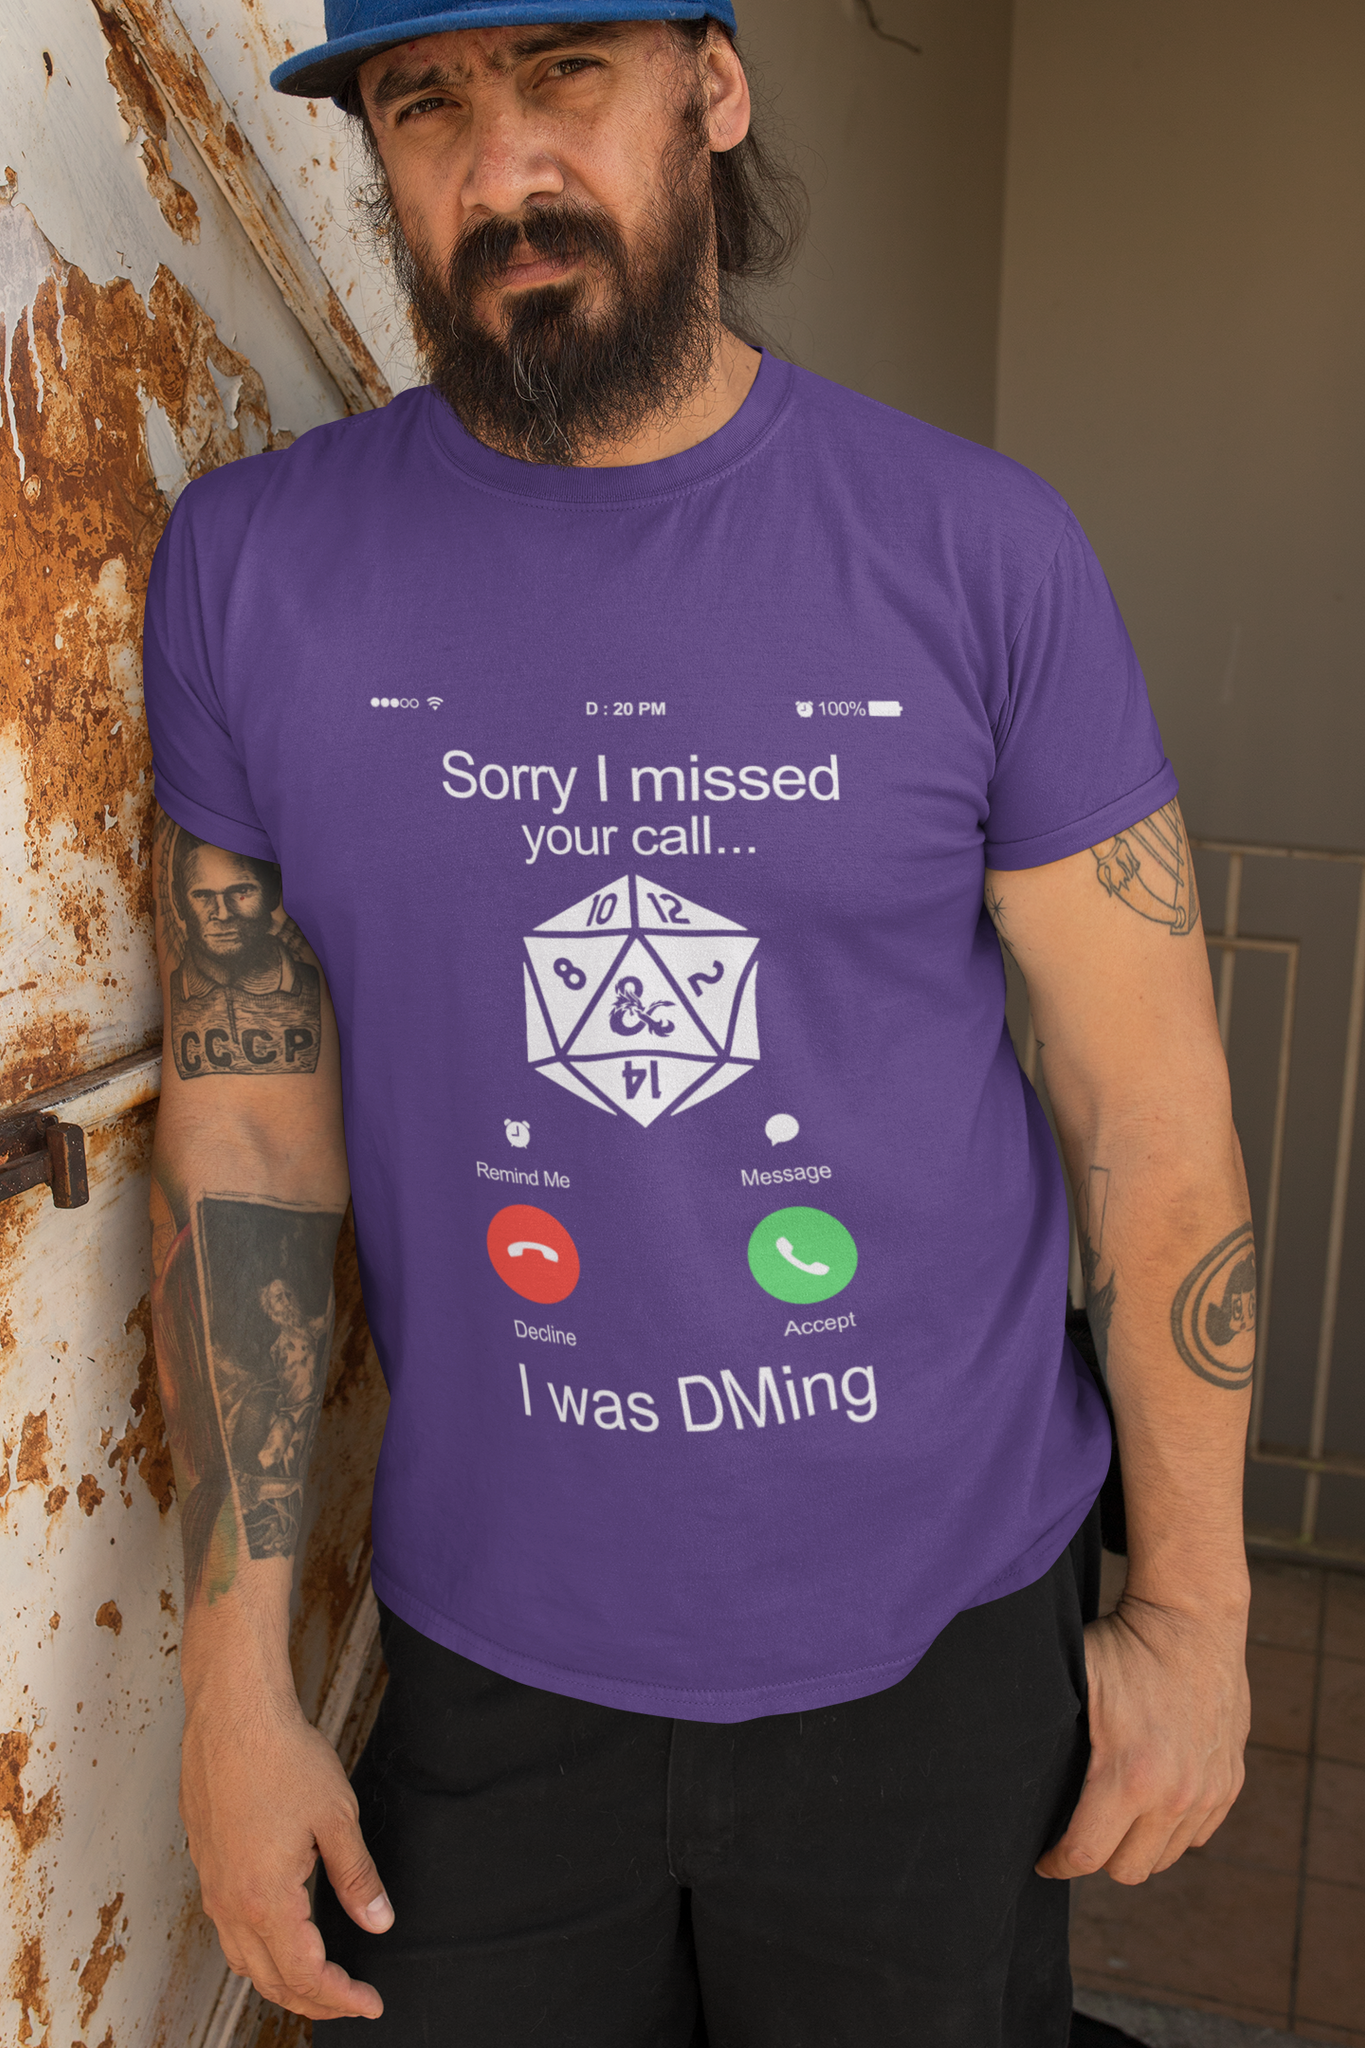 Dungeon And Dragon T Shirt, RPG Dice Games Tshirt, Sorry I Missed Your Call I Was DMing DND T Shirt